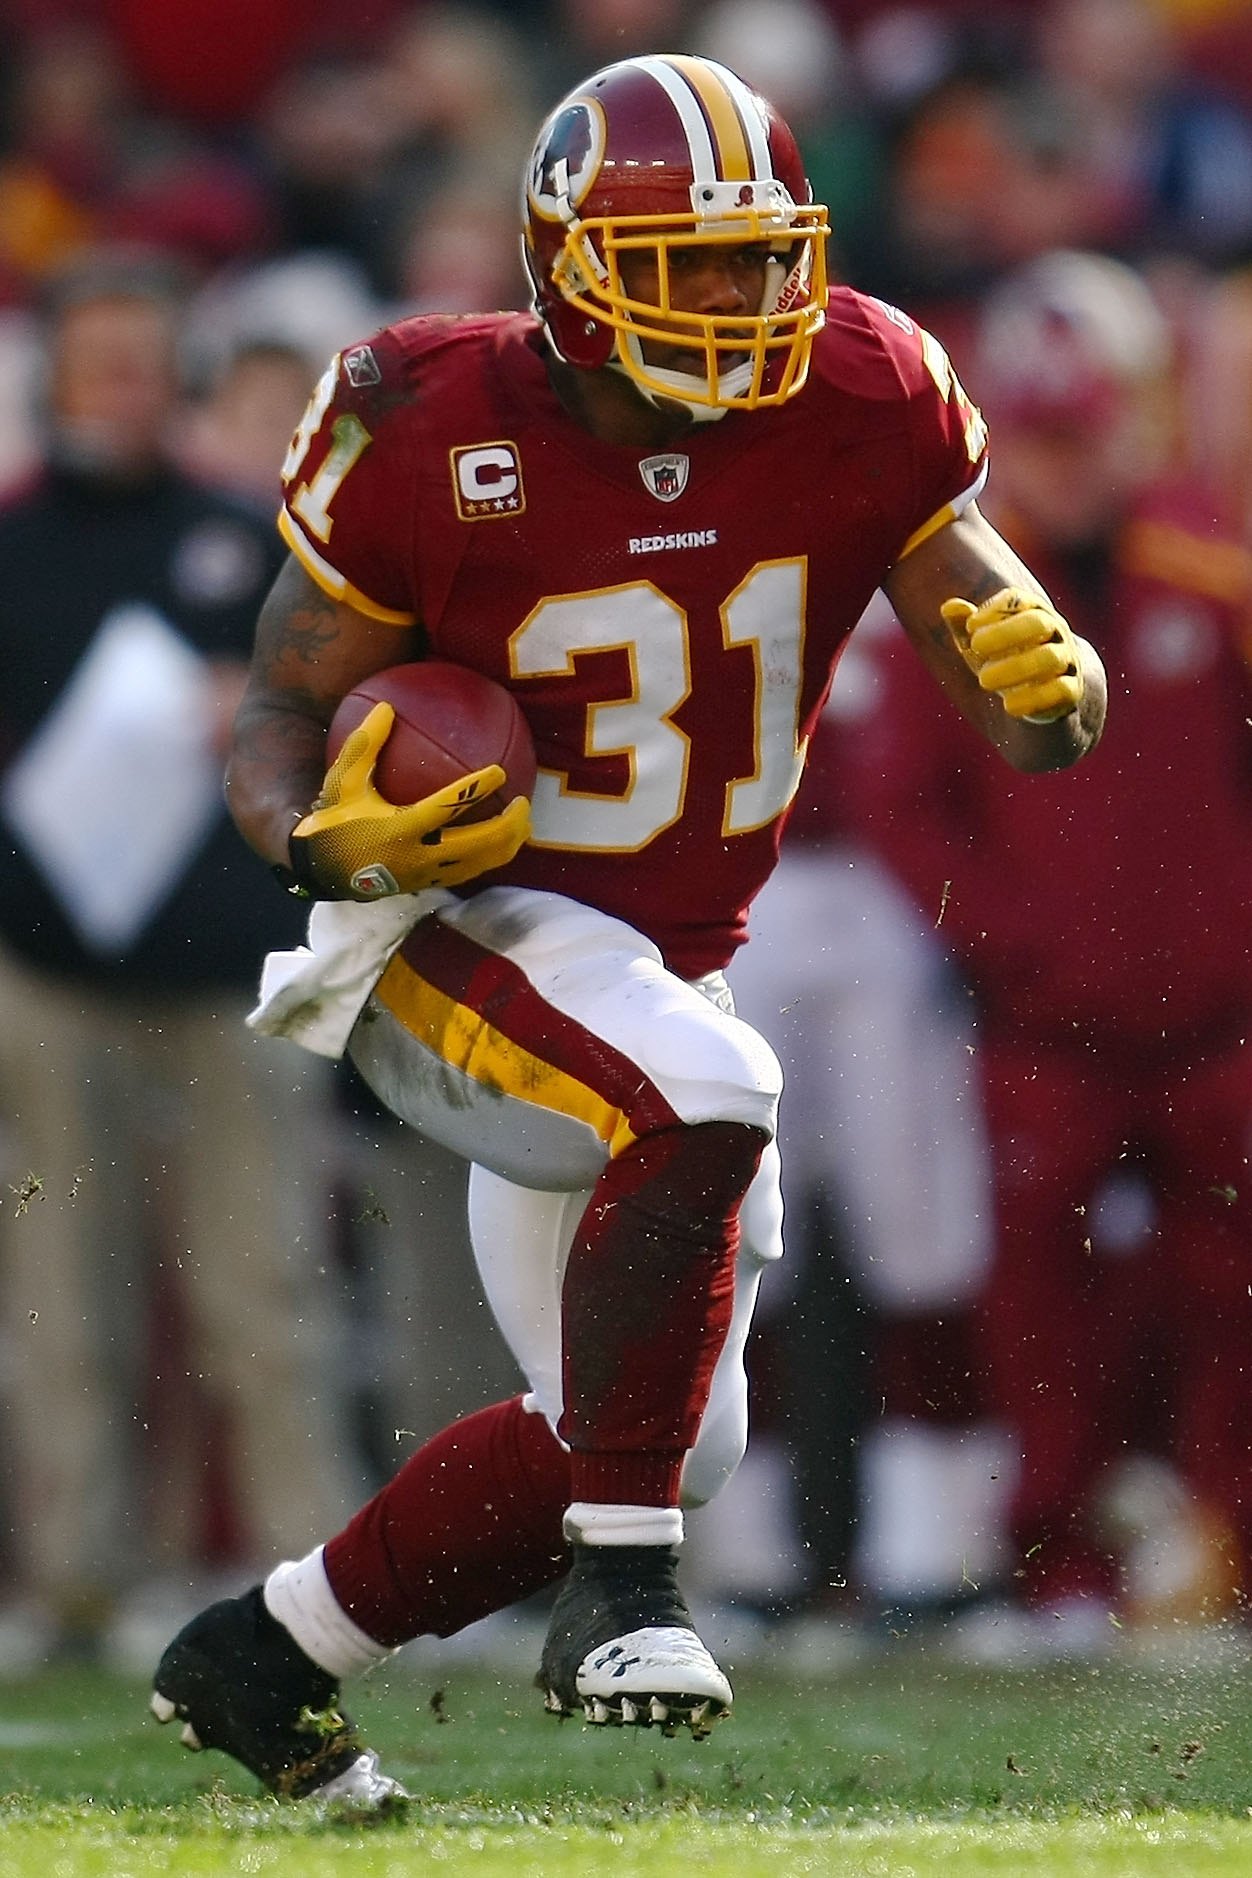 LANDOVER, MD - DECEMBER 06:  Rock Cartwright #31 of the Washington Redskins makes a break against the New Orleans Saints on December 6, 2009 at FedExField in Landover, Maryland.  (Photo by Chris McGrath/Getty Images)